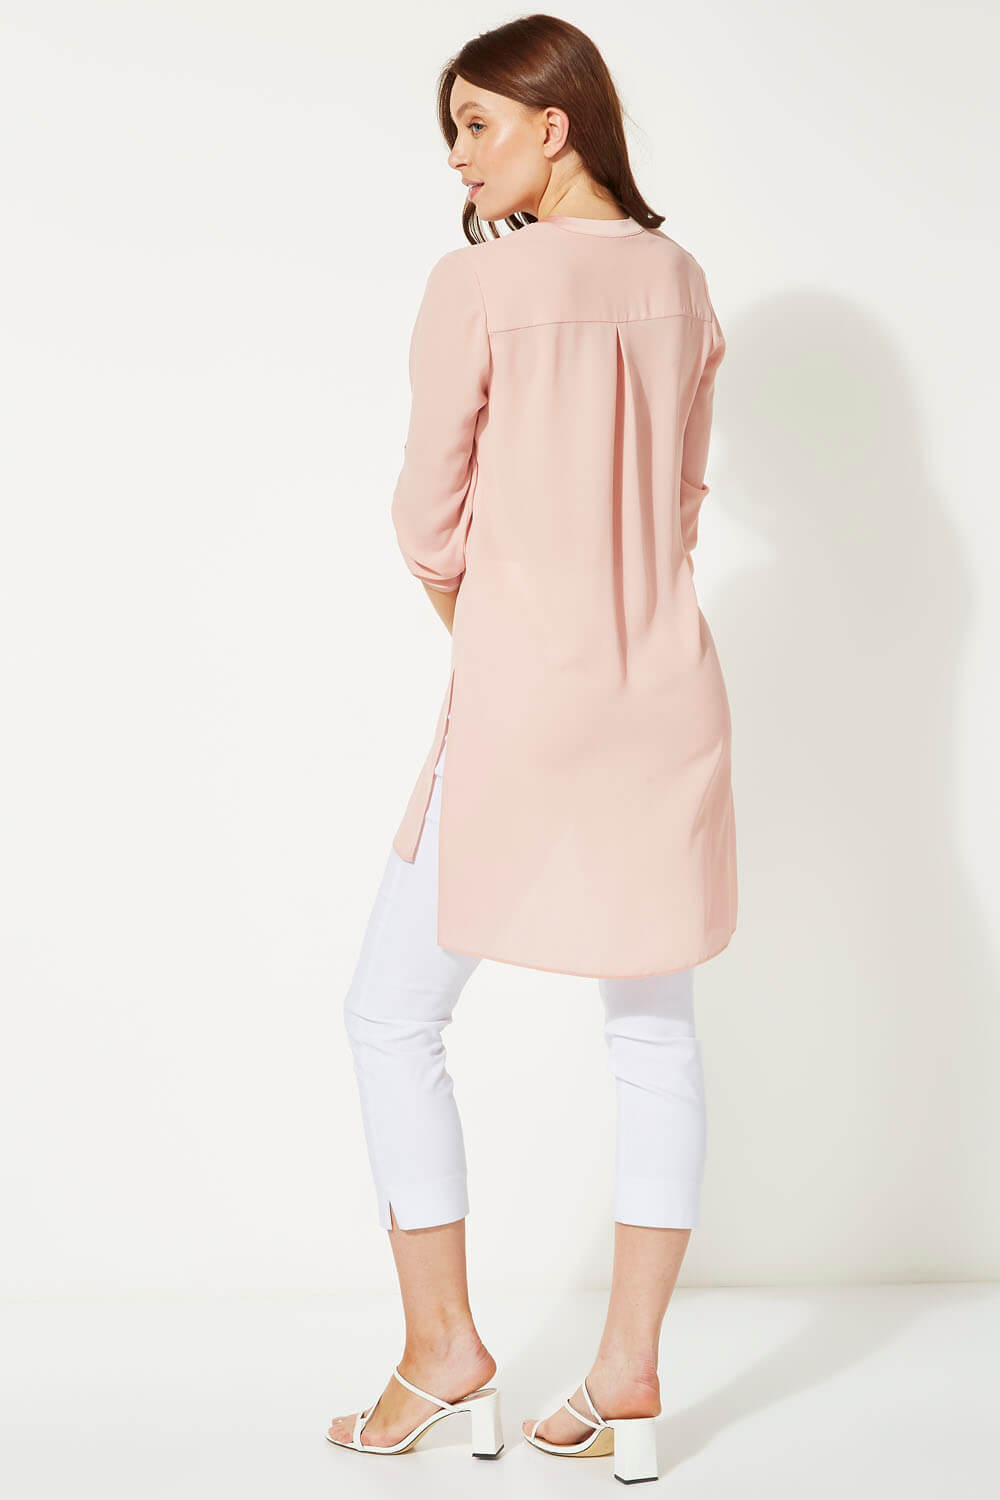 PINK Longline Button Through Blouse, Image 3 of 5